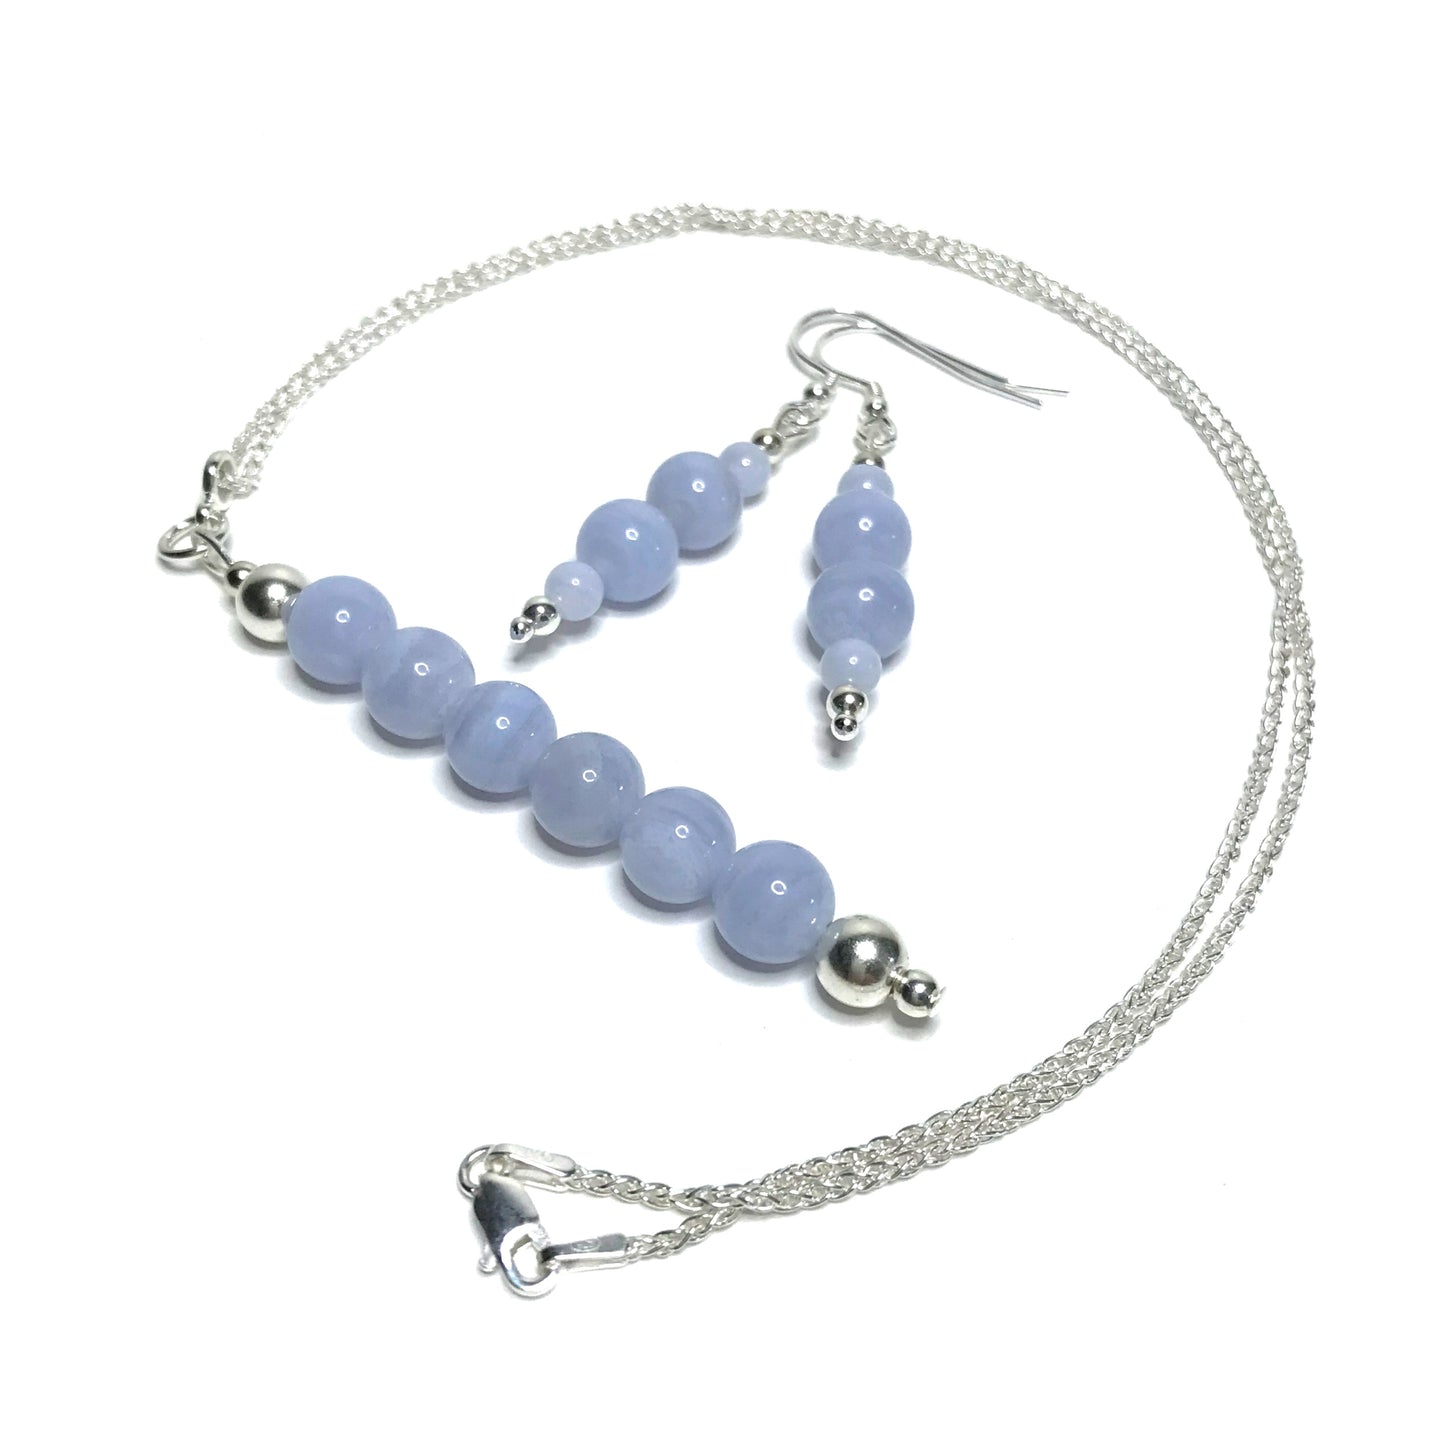 Blue lace agate pendant and matching earring set